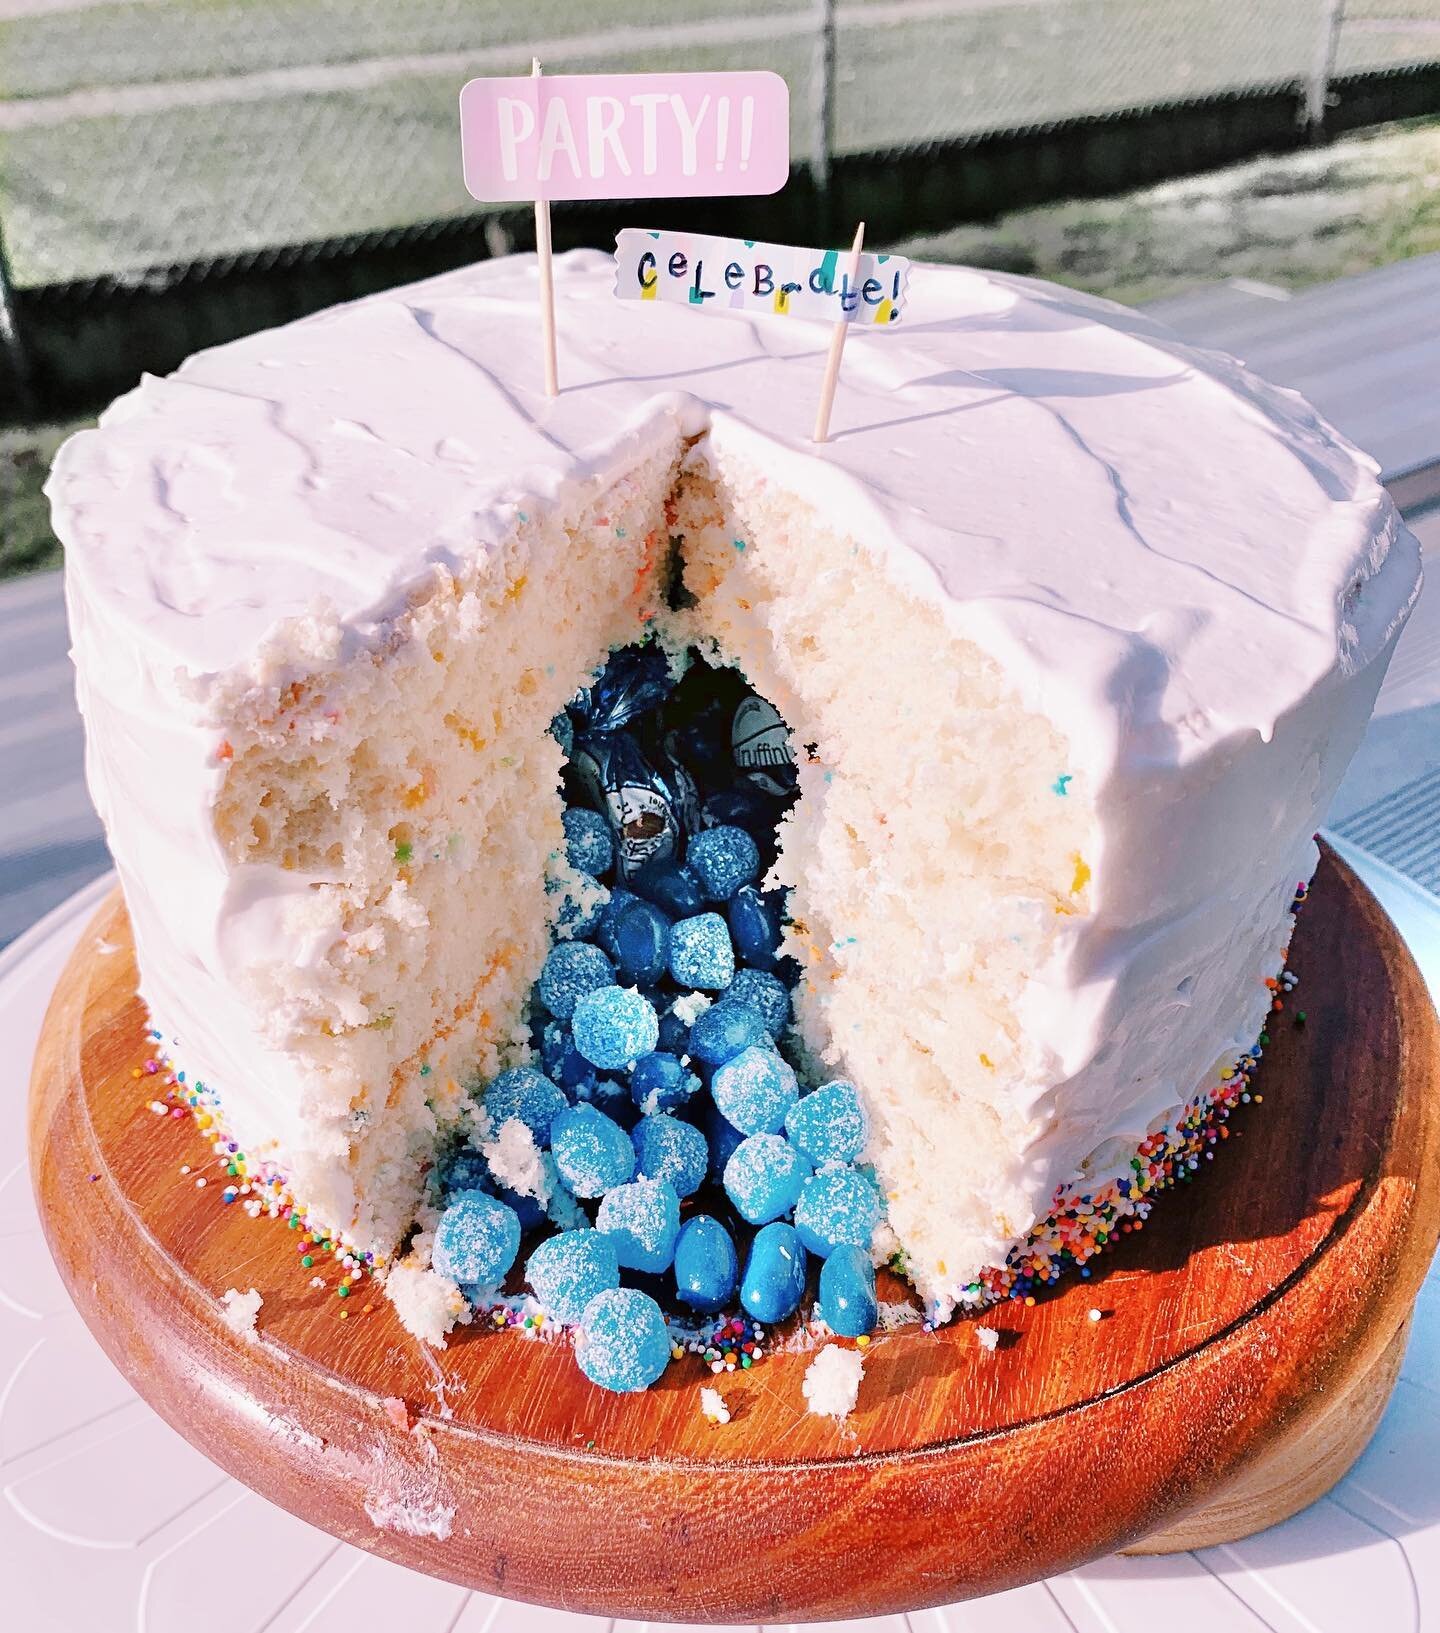 ☆ Spread kindness like confetti cake ☆ 
Fell down the Pinterest rabbit hole last weekend 🕳🐇and whipped up this pi&ntilde;ata cake to bring to my bestie&rsquo;s baby gender reveal as a little surprise. I love baking and this was so much fun to make!